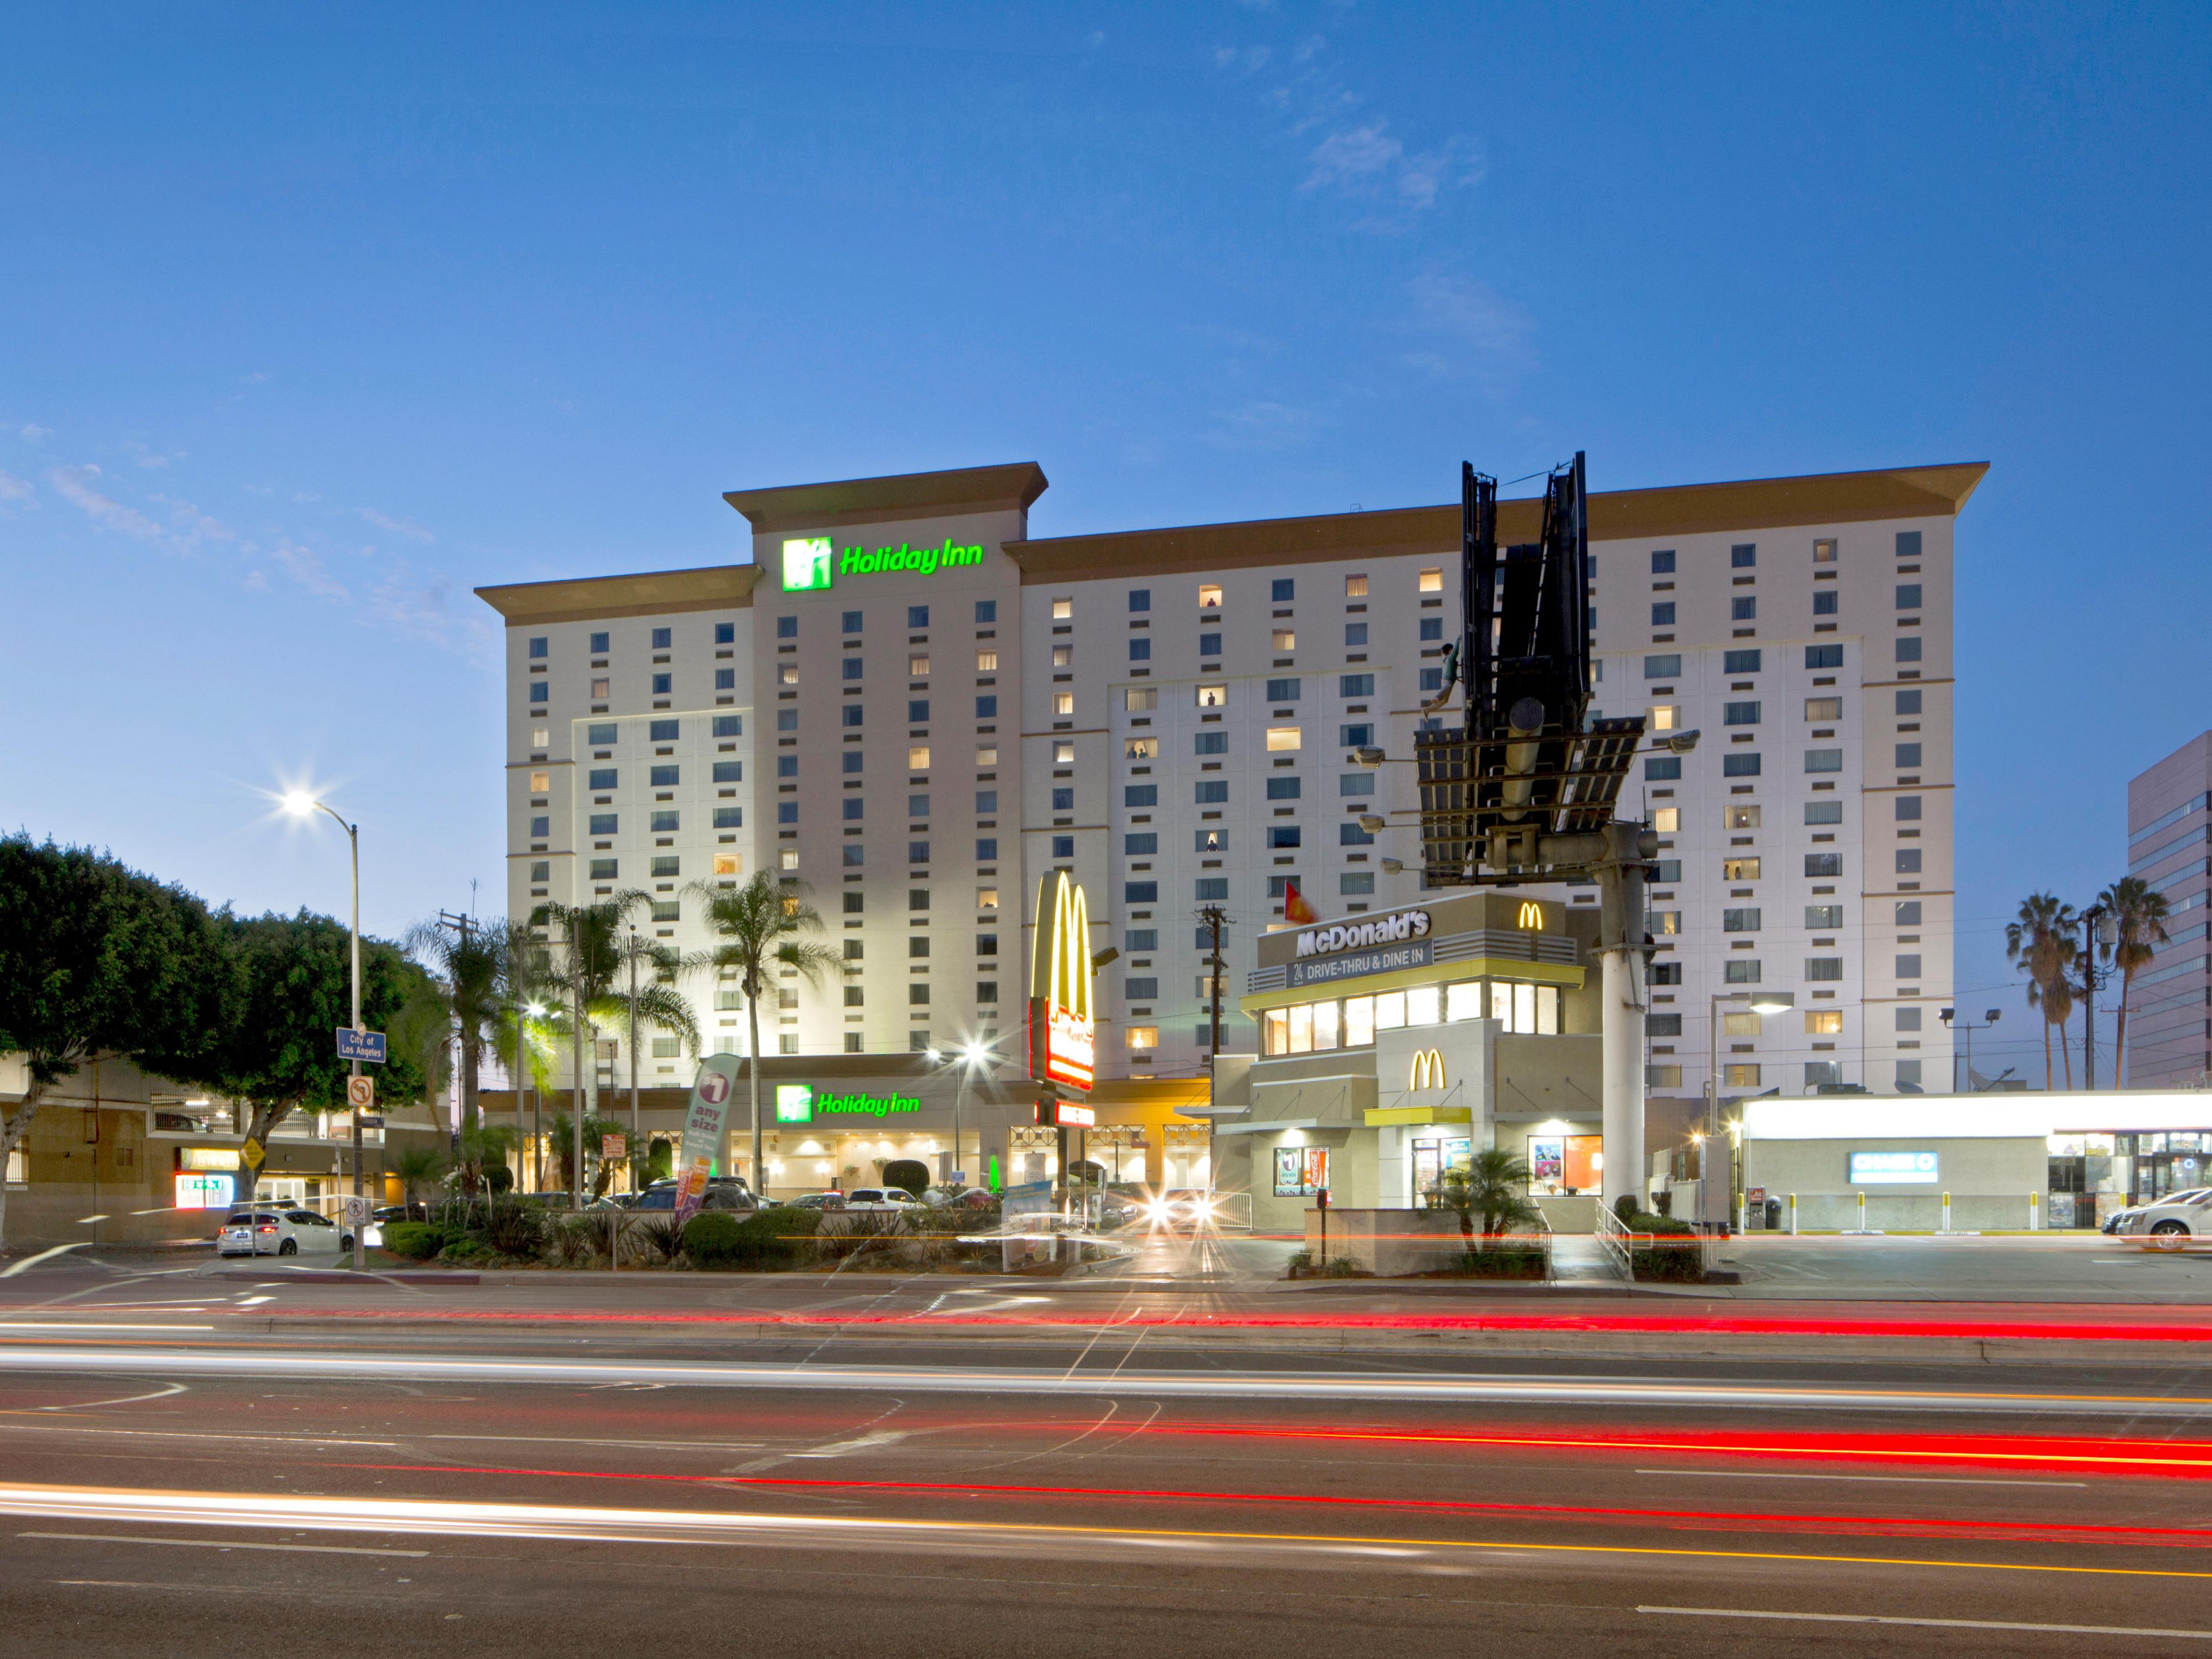 The Holiday Inn Lax acquired by Chinese company